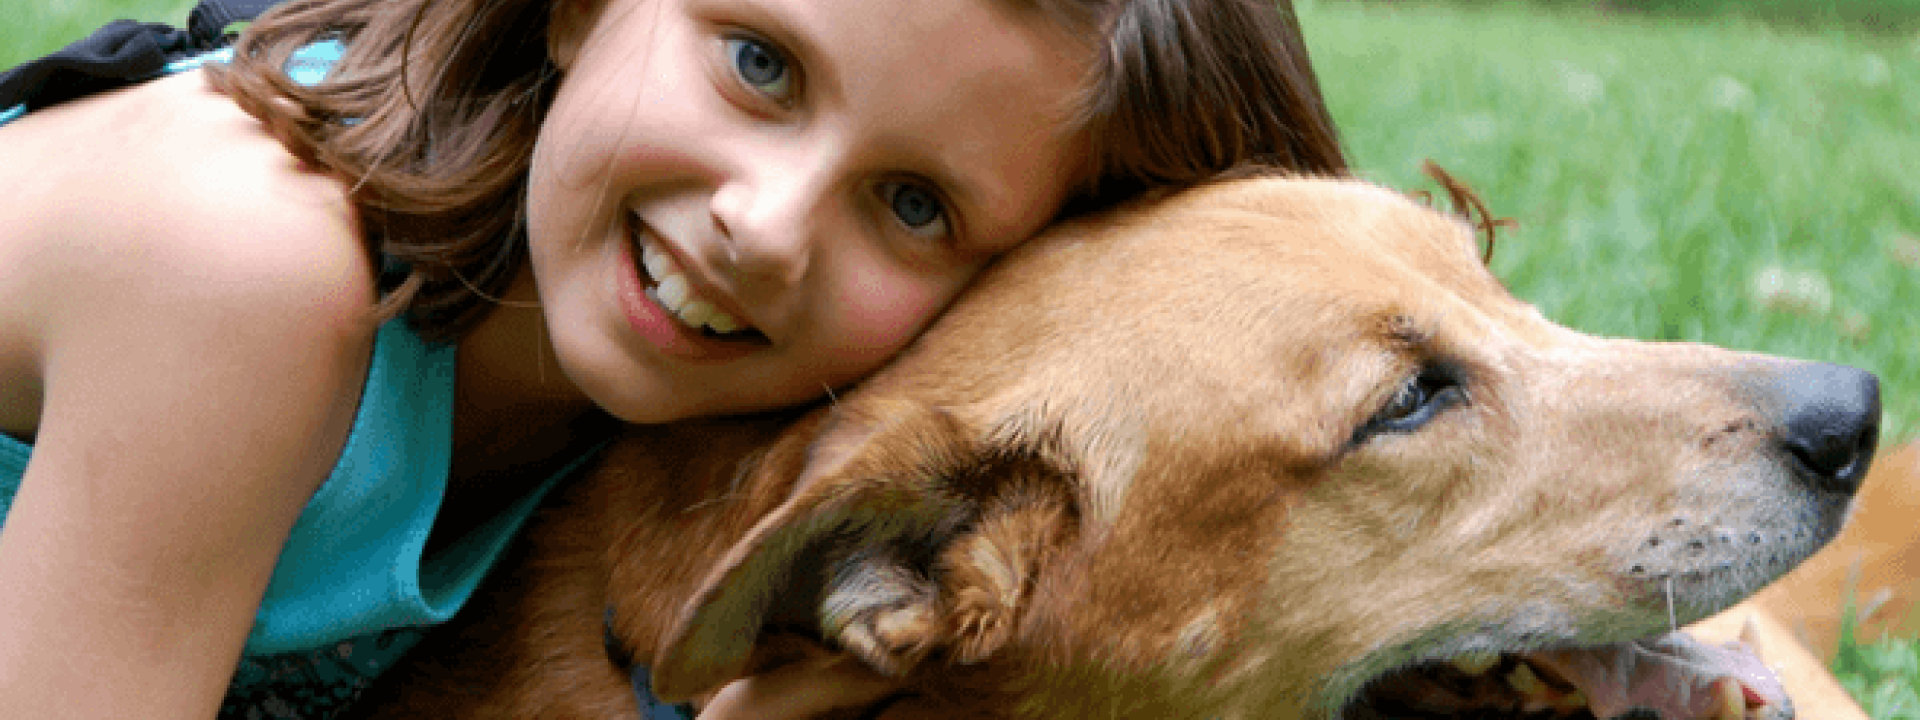 blog-title-5-advantages-for-kids-who-grow-up-with-dogs.jpg